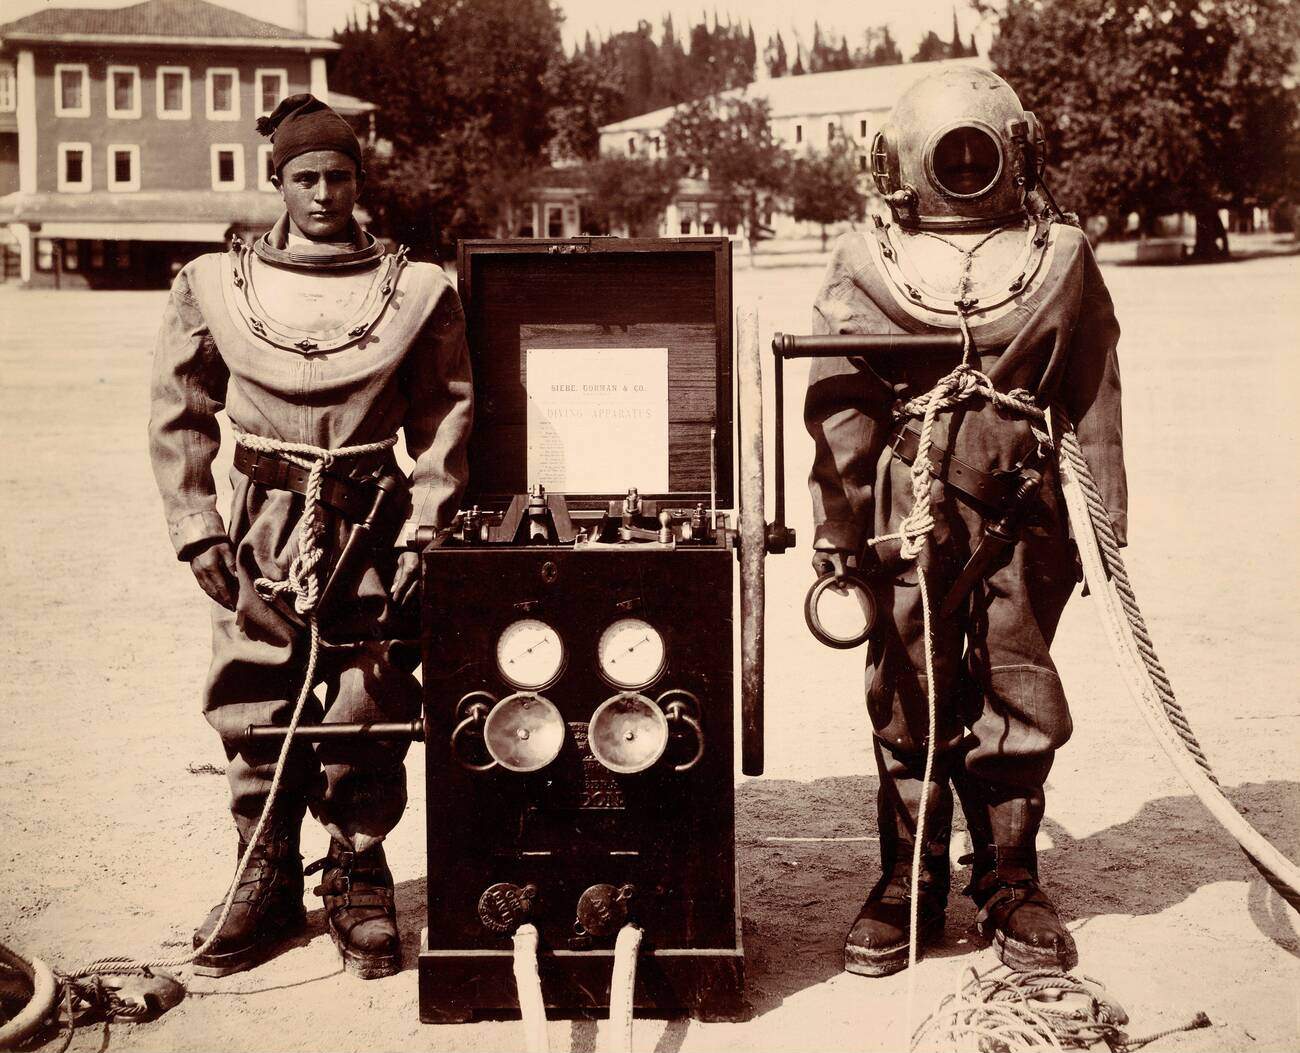 Naval divers in diving suits. 19th-century diving suit and apparatus being used by Turkish naval divers in Istanbul, then capital of the Ottoman Empir